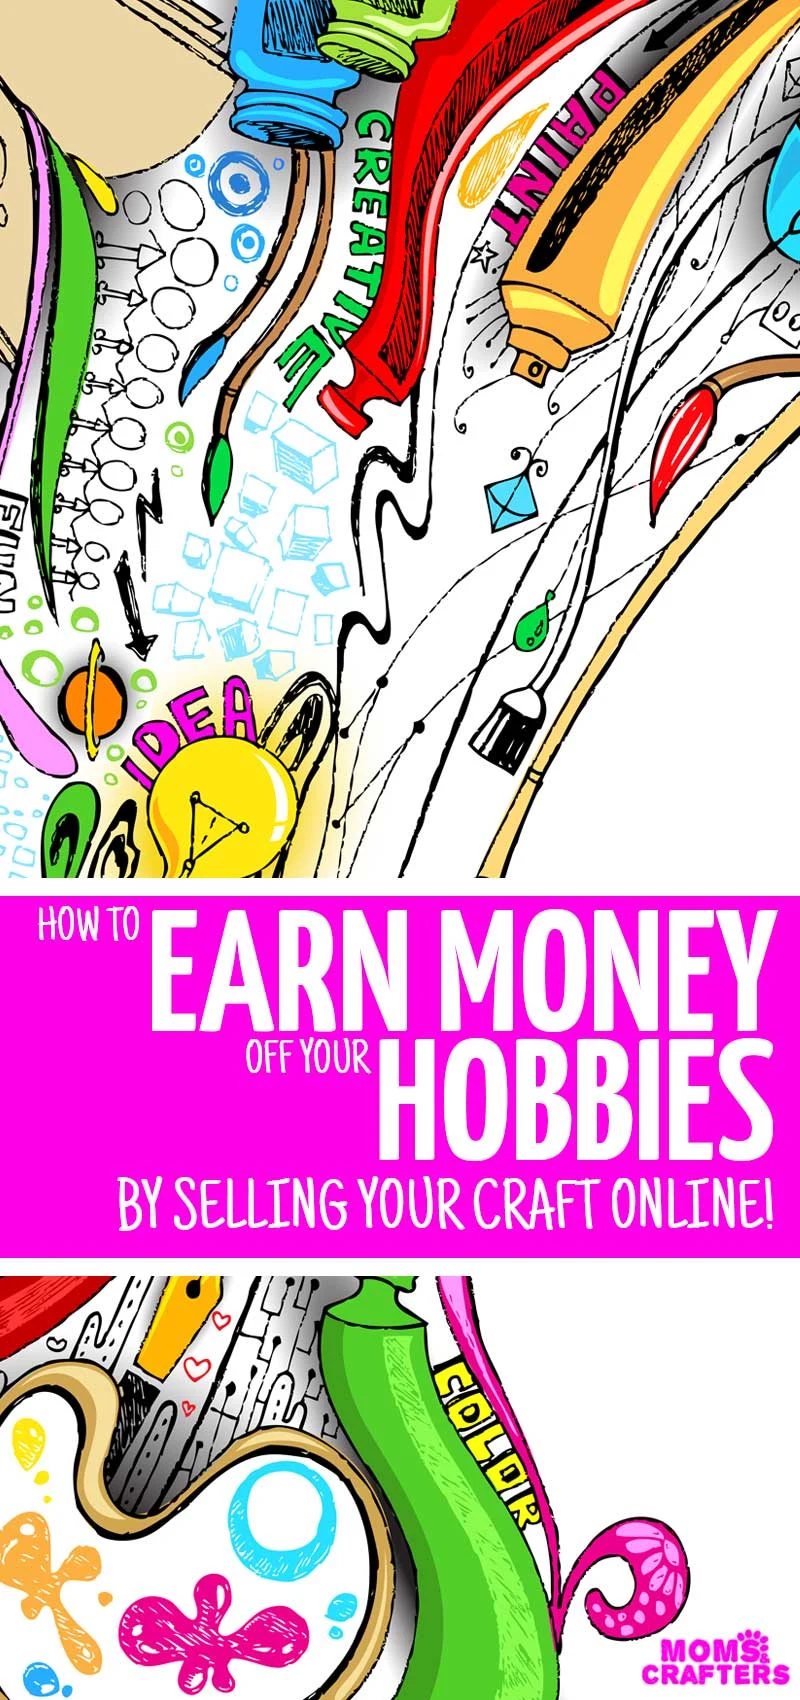 Click for the best proven strategies for selling crafts online and Etsy seller tips! Marketing handmade goods on Etsy, as well as other tips and tricks for photogrpahy and running an Etsy business in 2018